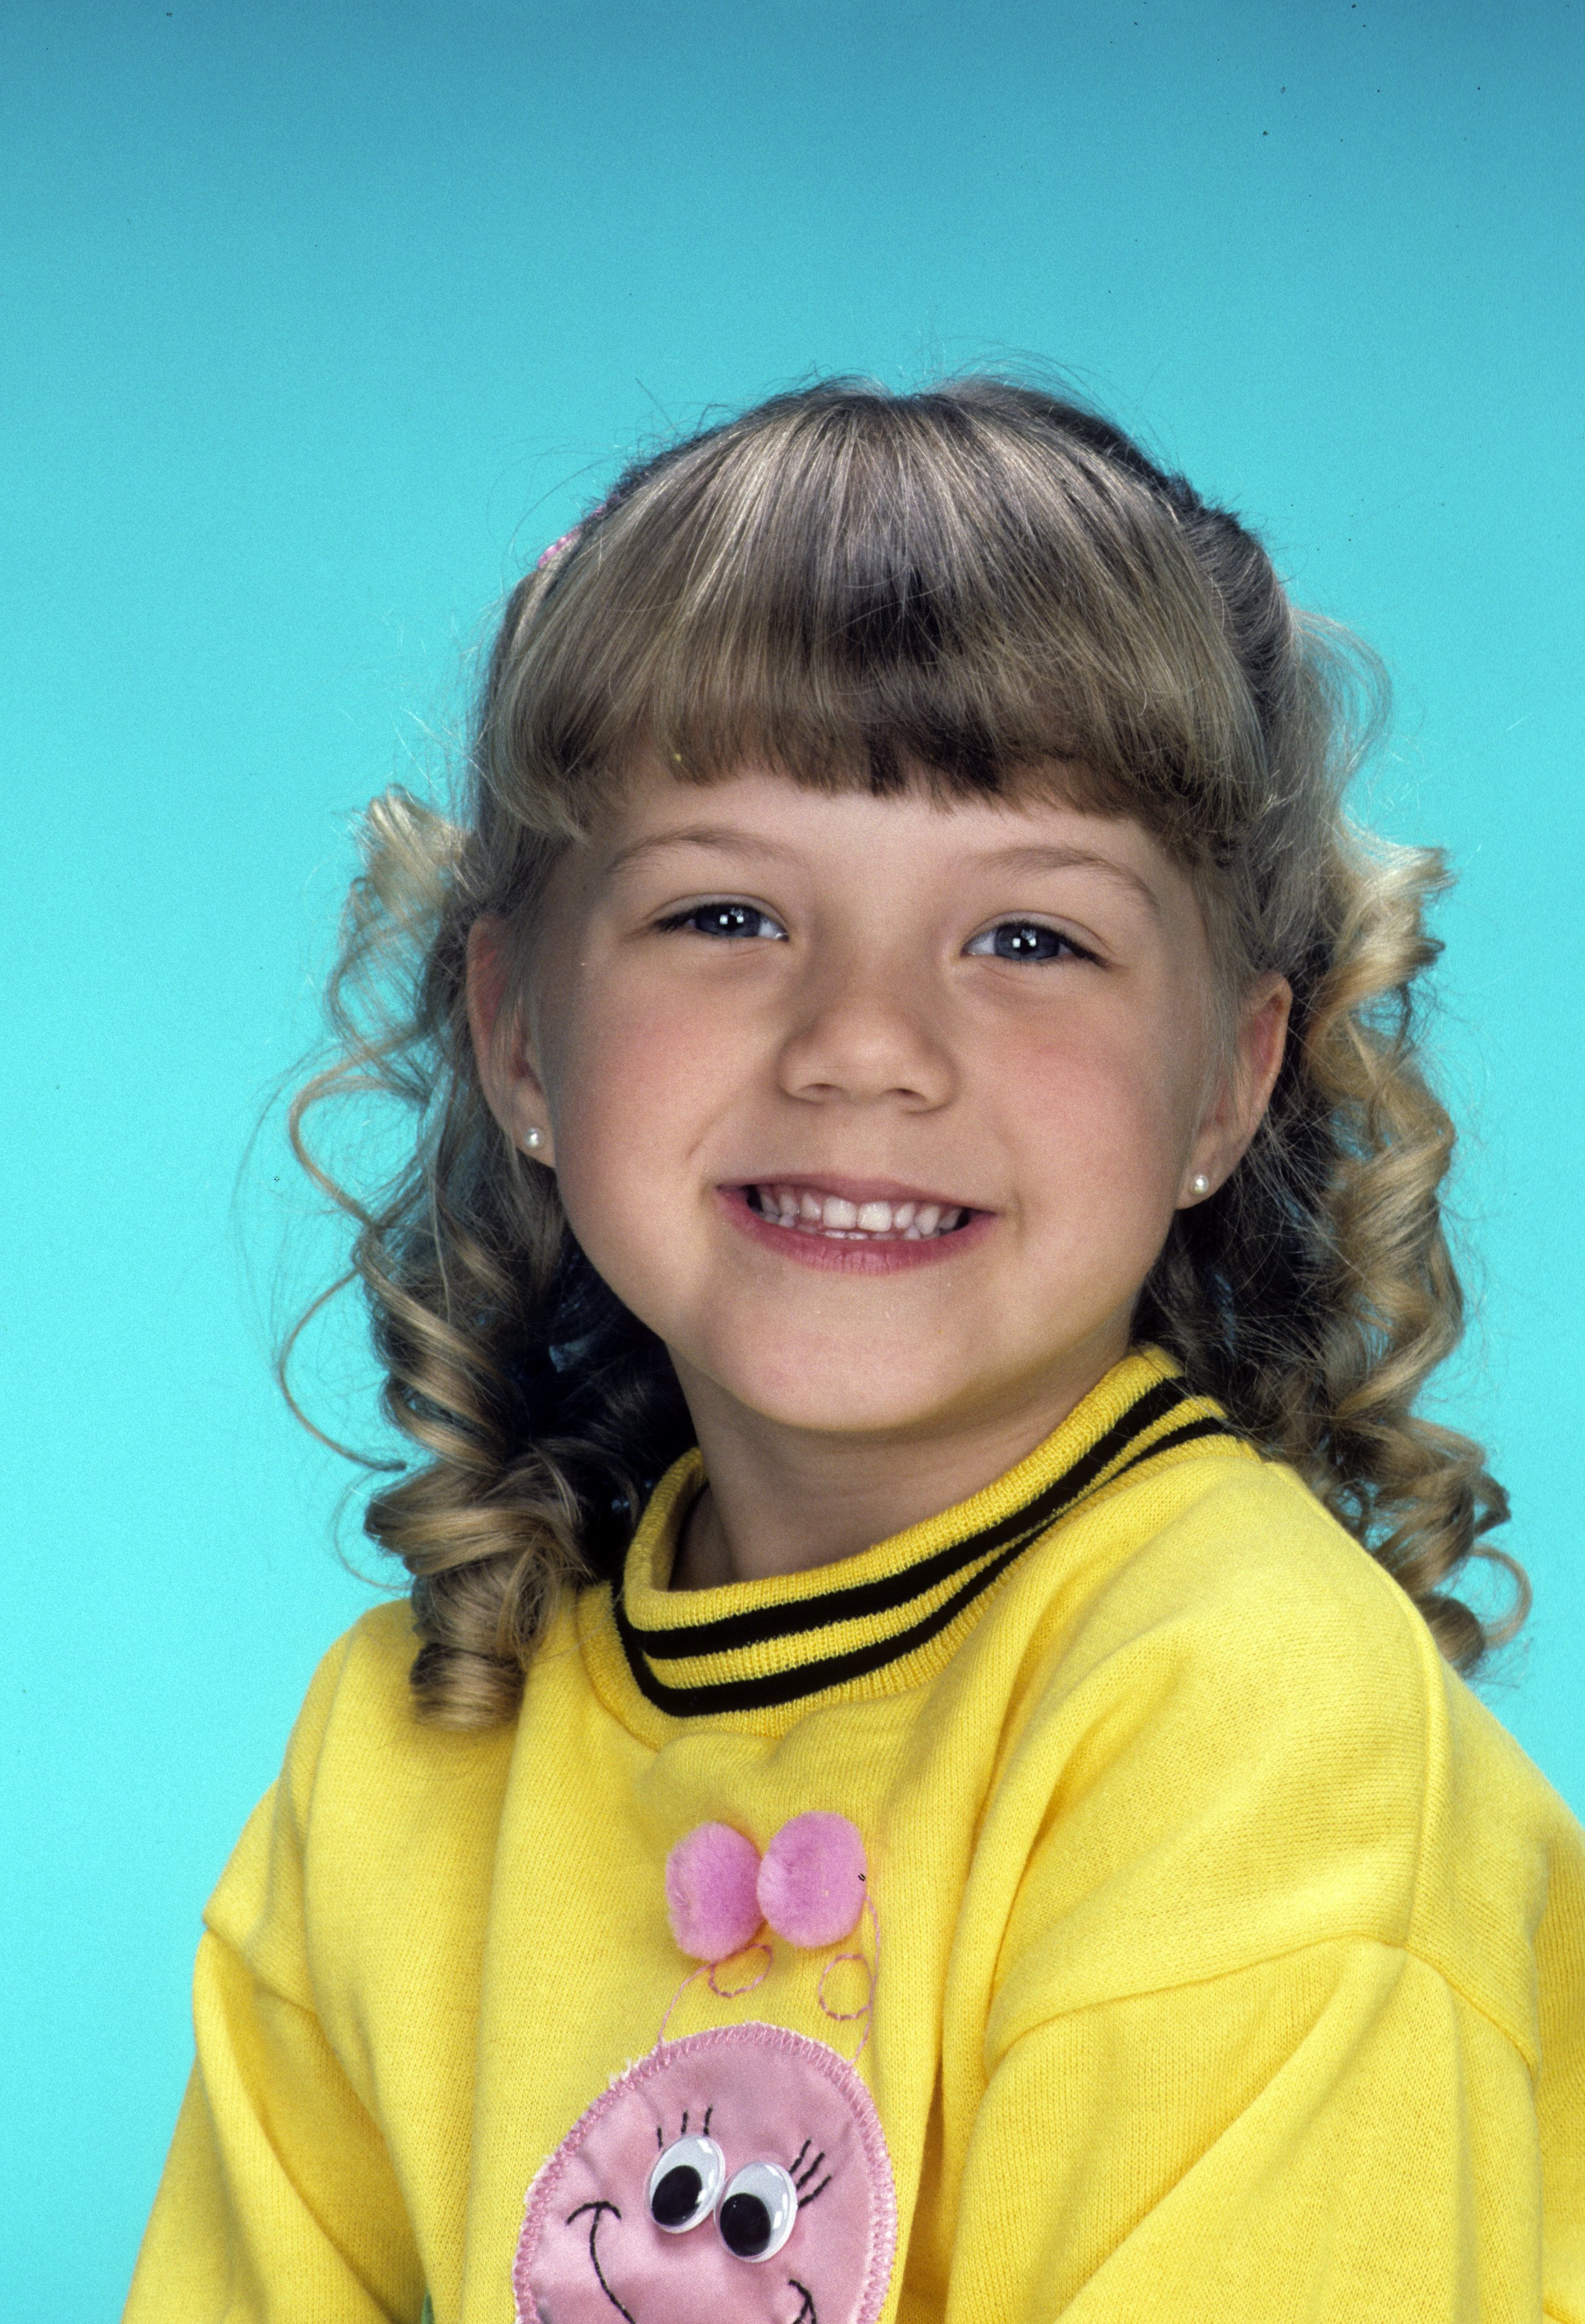 Jodie Sweetin on "Full House in 1987 | Source: Getty Images